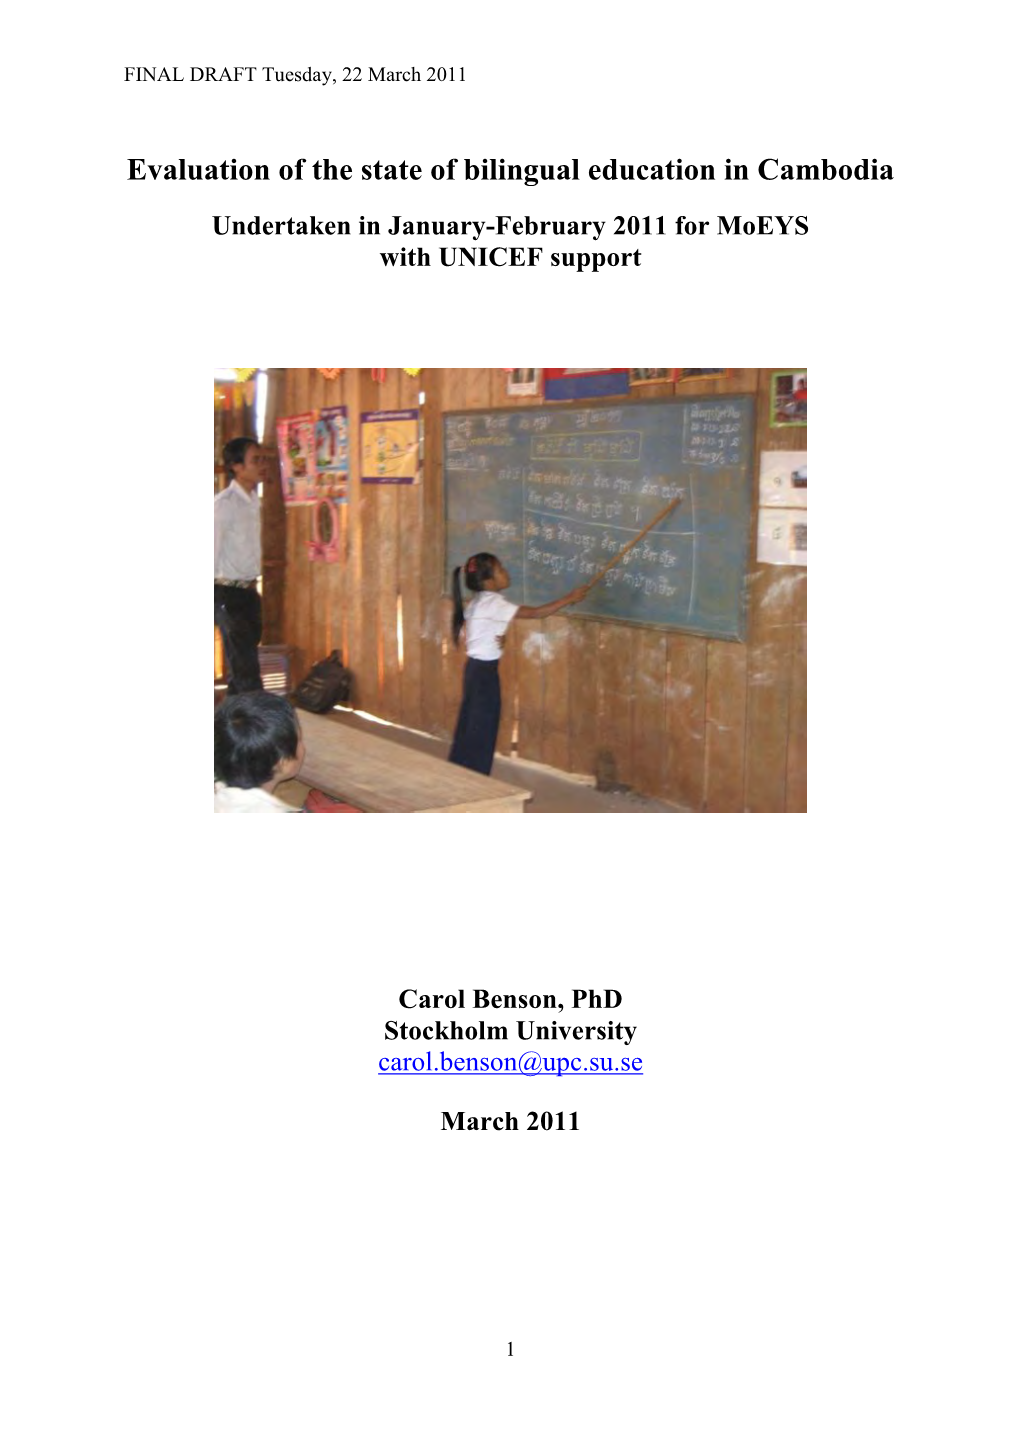 Evaluation of the State of Bilingual Education in Cambodia Undertaken in January-February 2011 for Moeys with UNICEF Support